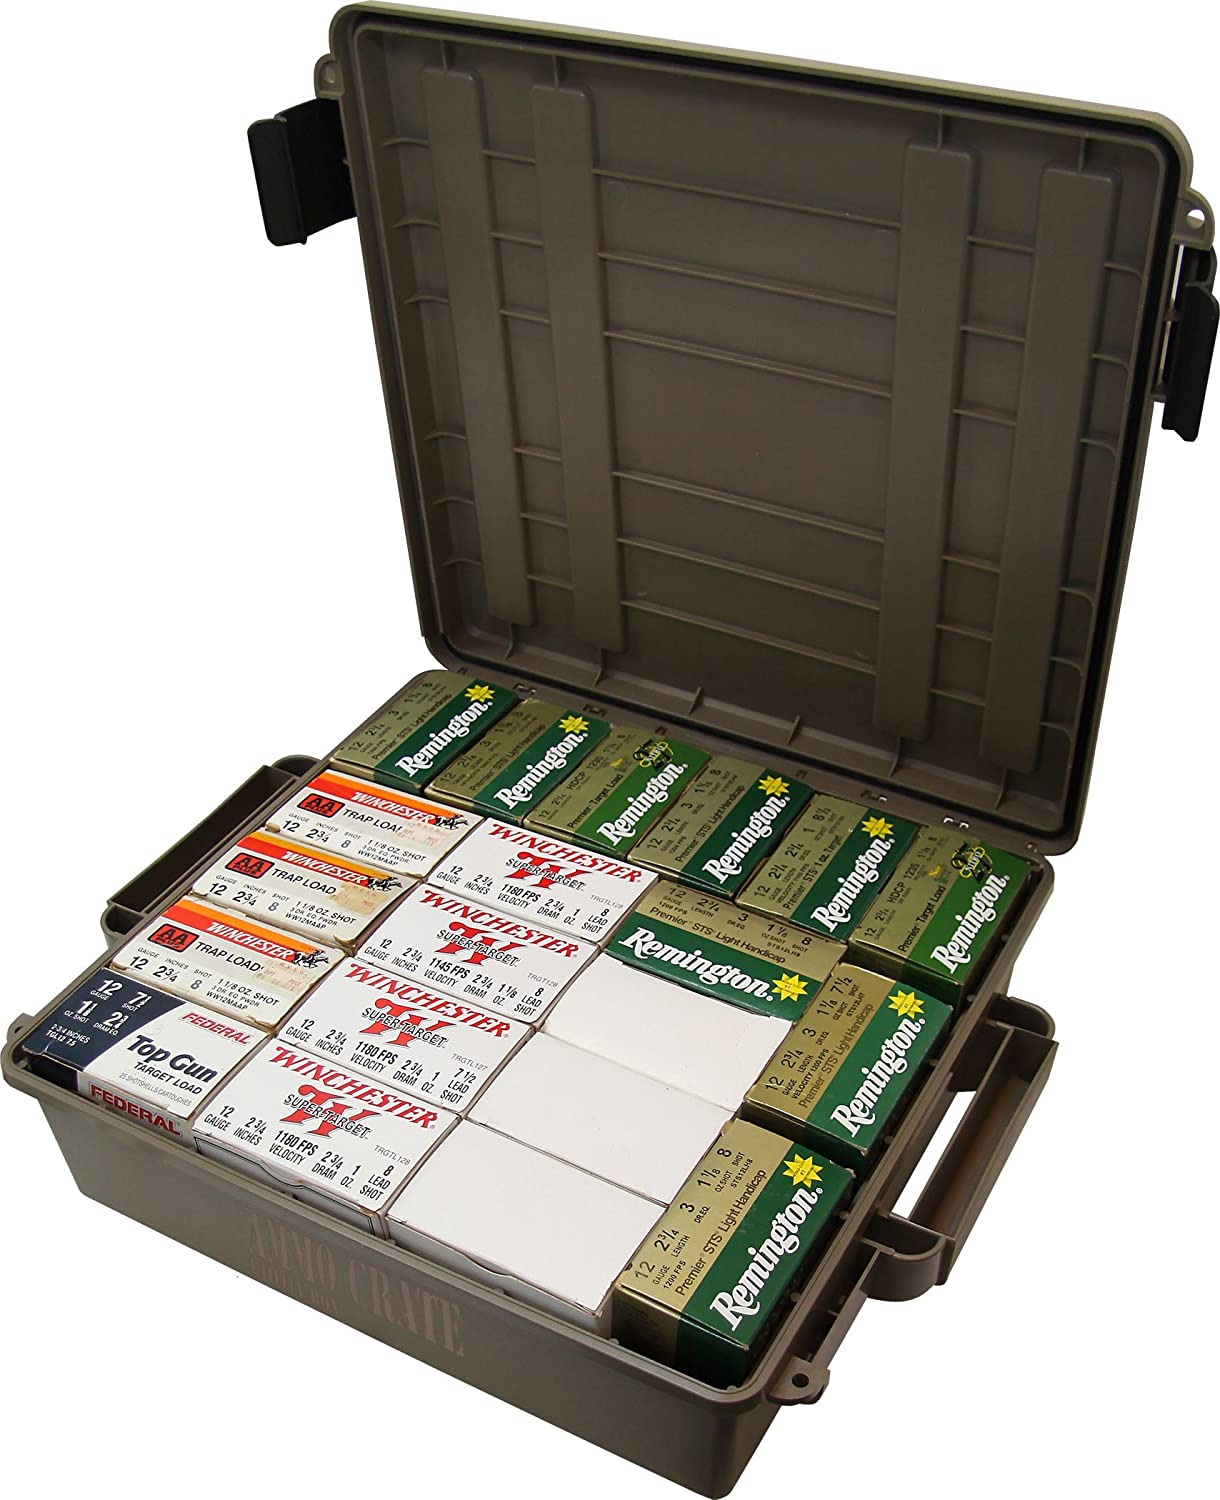 ACR5-72 - Ammo Crate Utility Box